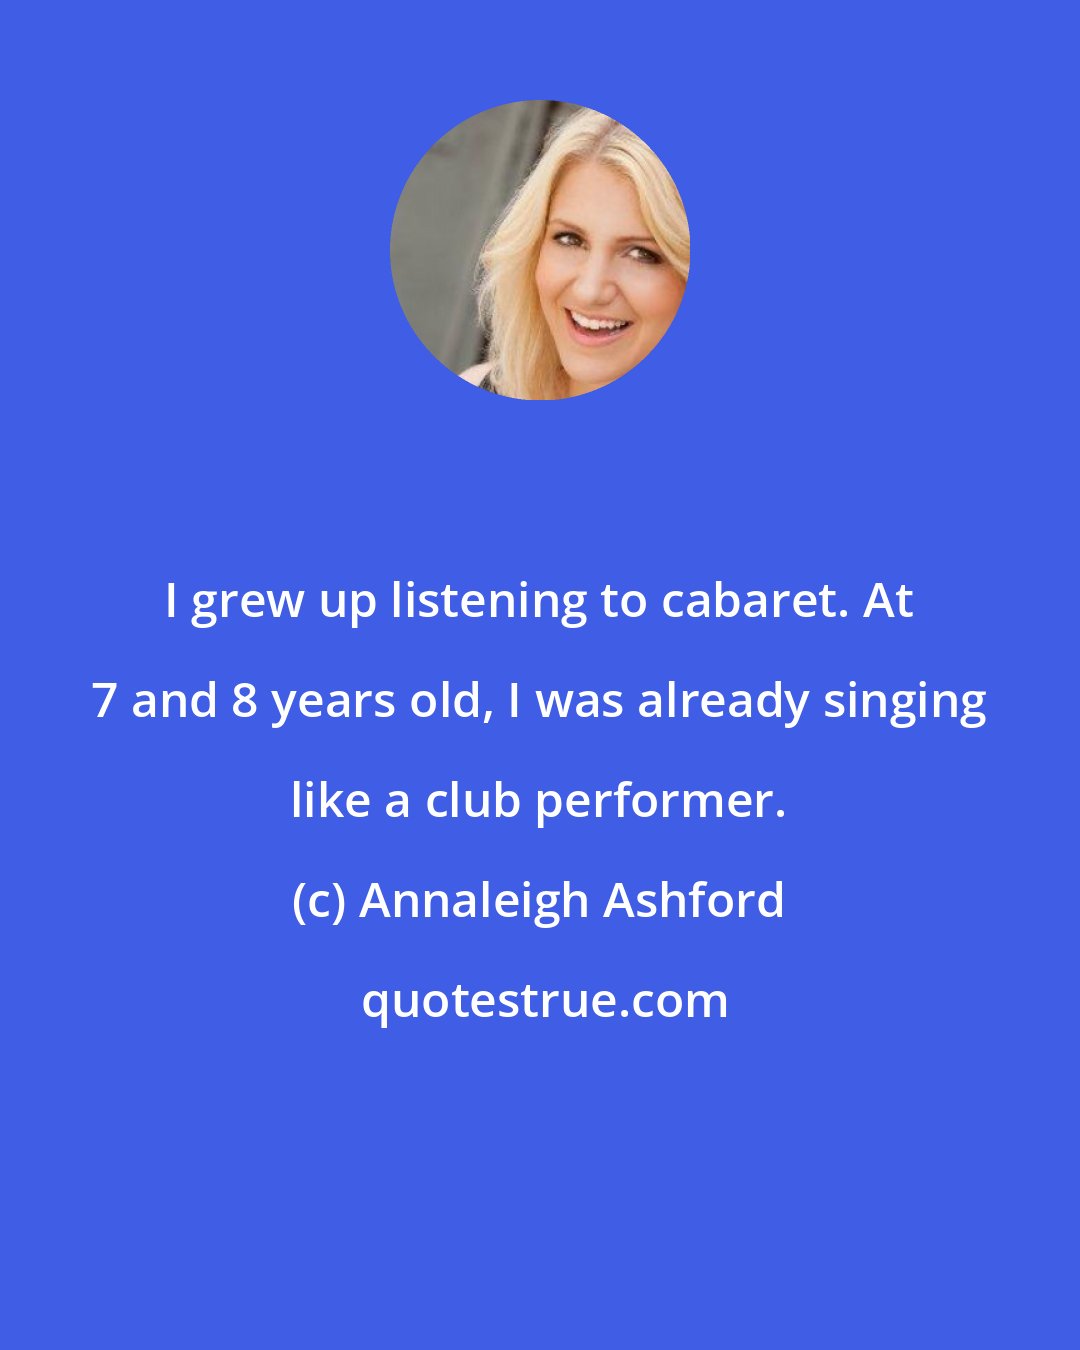 Annaleigh Ashford: I grew up listening to cabaret. At 7 and 8 years old, I was already singing like a club performer.